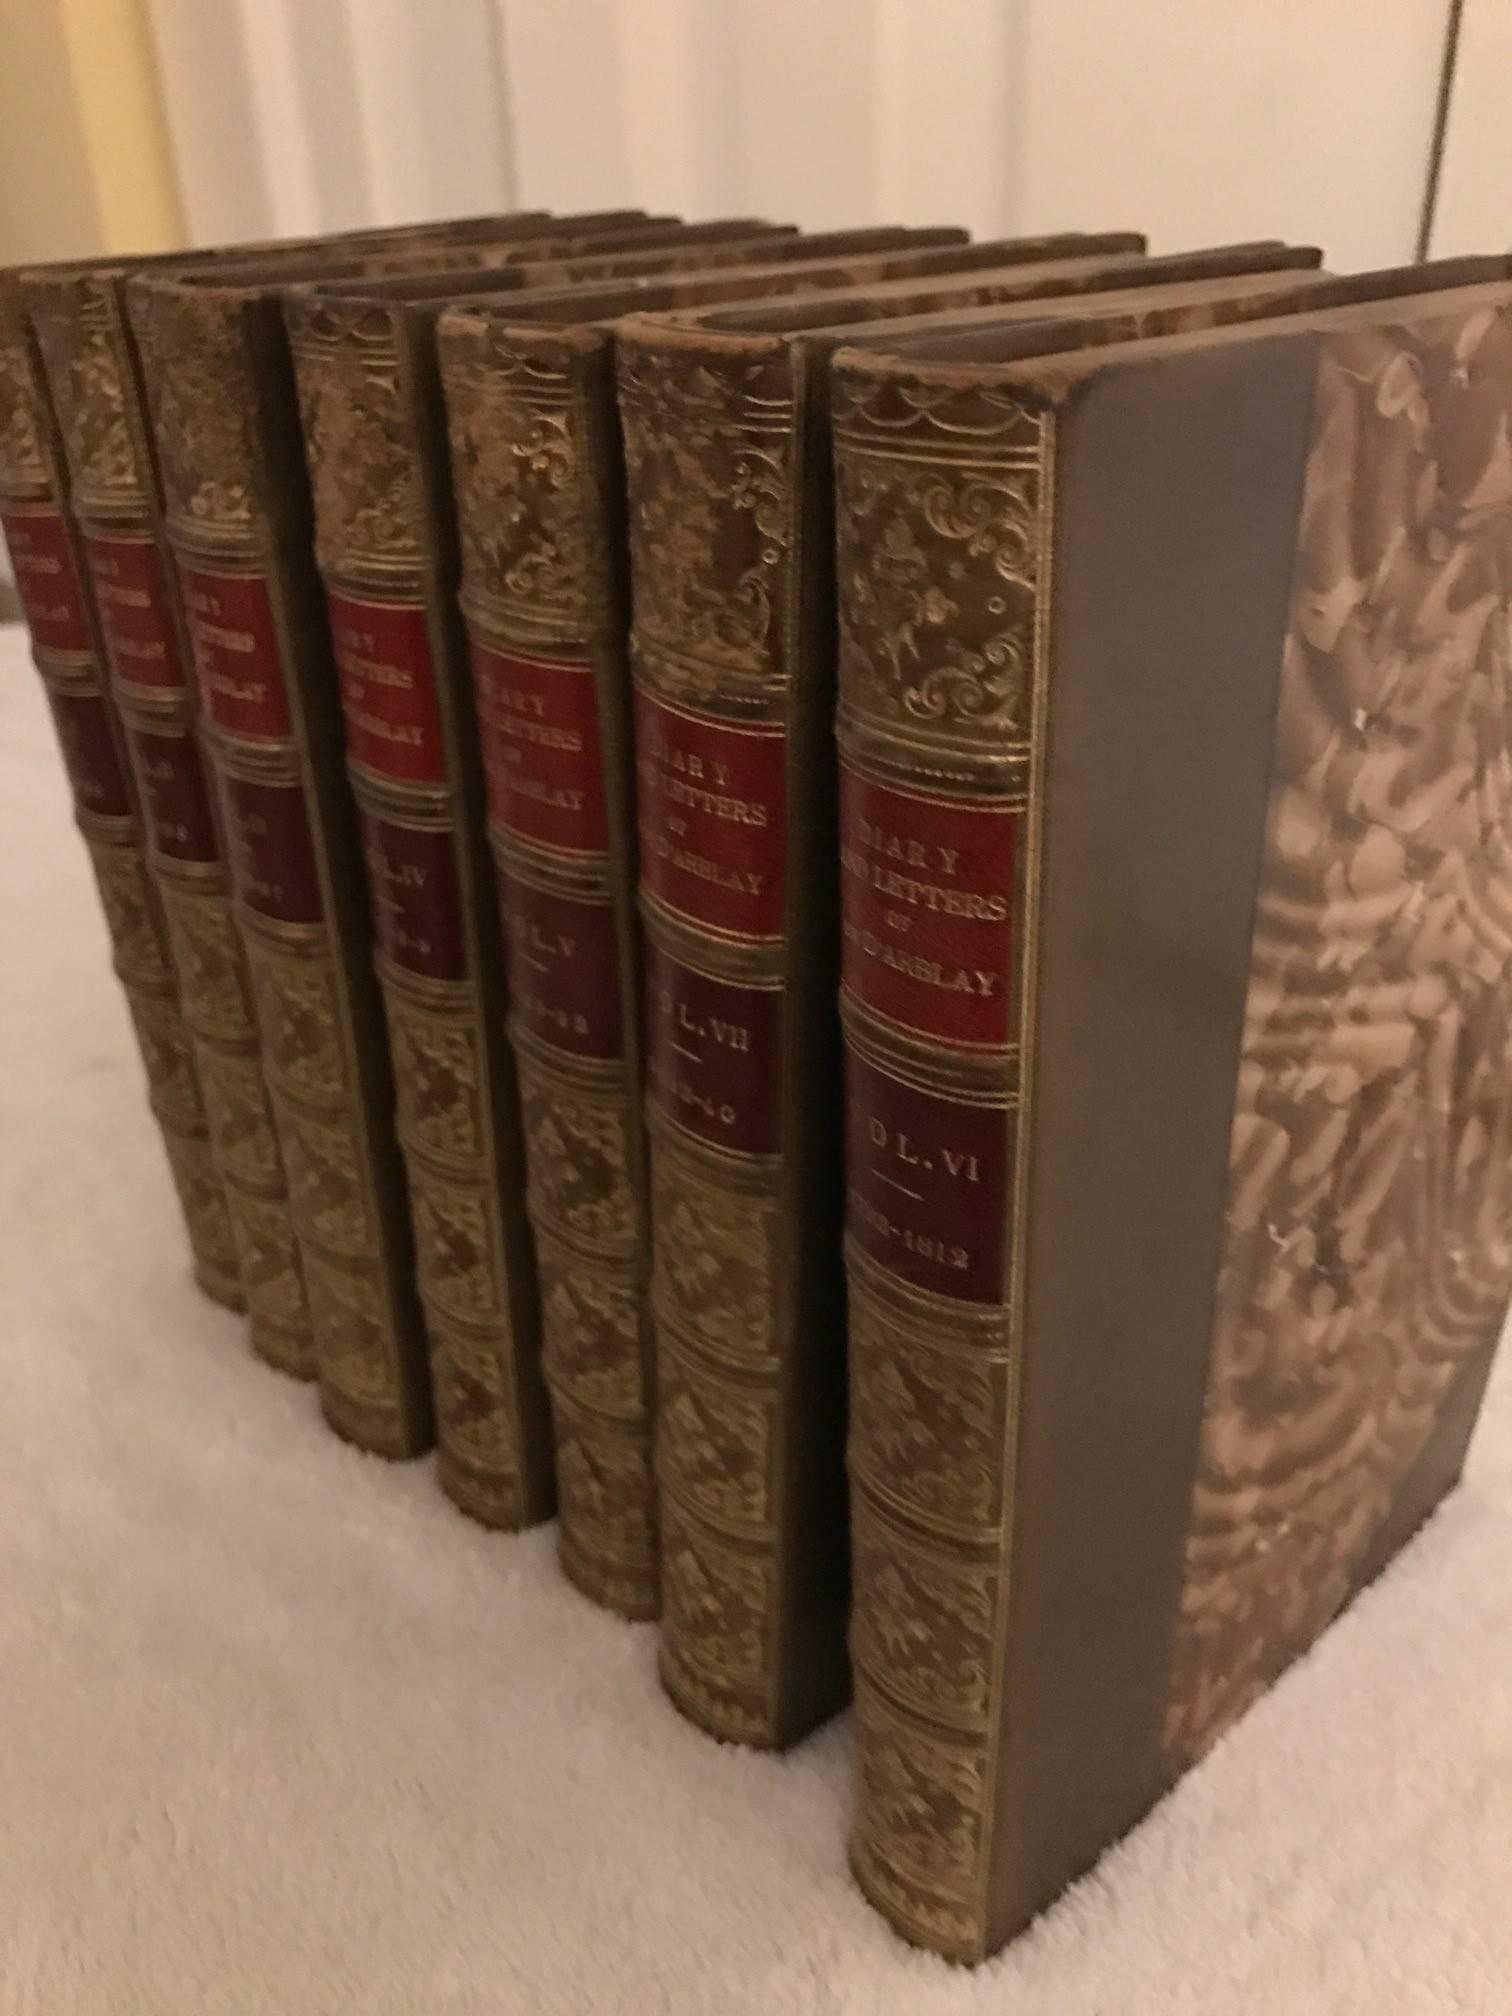 London: Published for Henry Colburn, by his successor hurst and blackett, Great Marlborough street, 1846. A new edition. With Portraits. 7 vols. 12mo. Bound in full brown polished calf, gilt spine, T.E.g., by Wood, London. Bookplate of St. Paul's